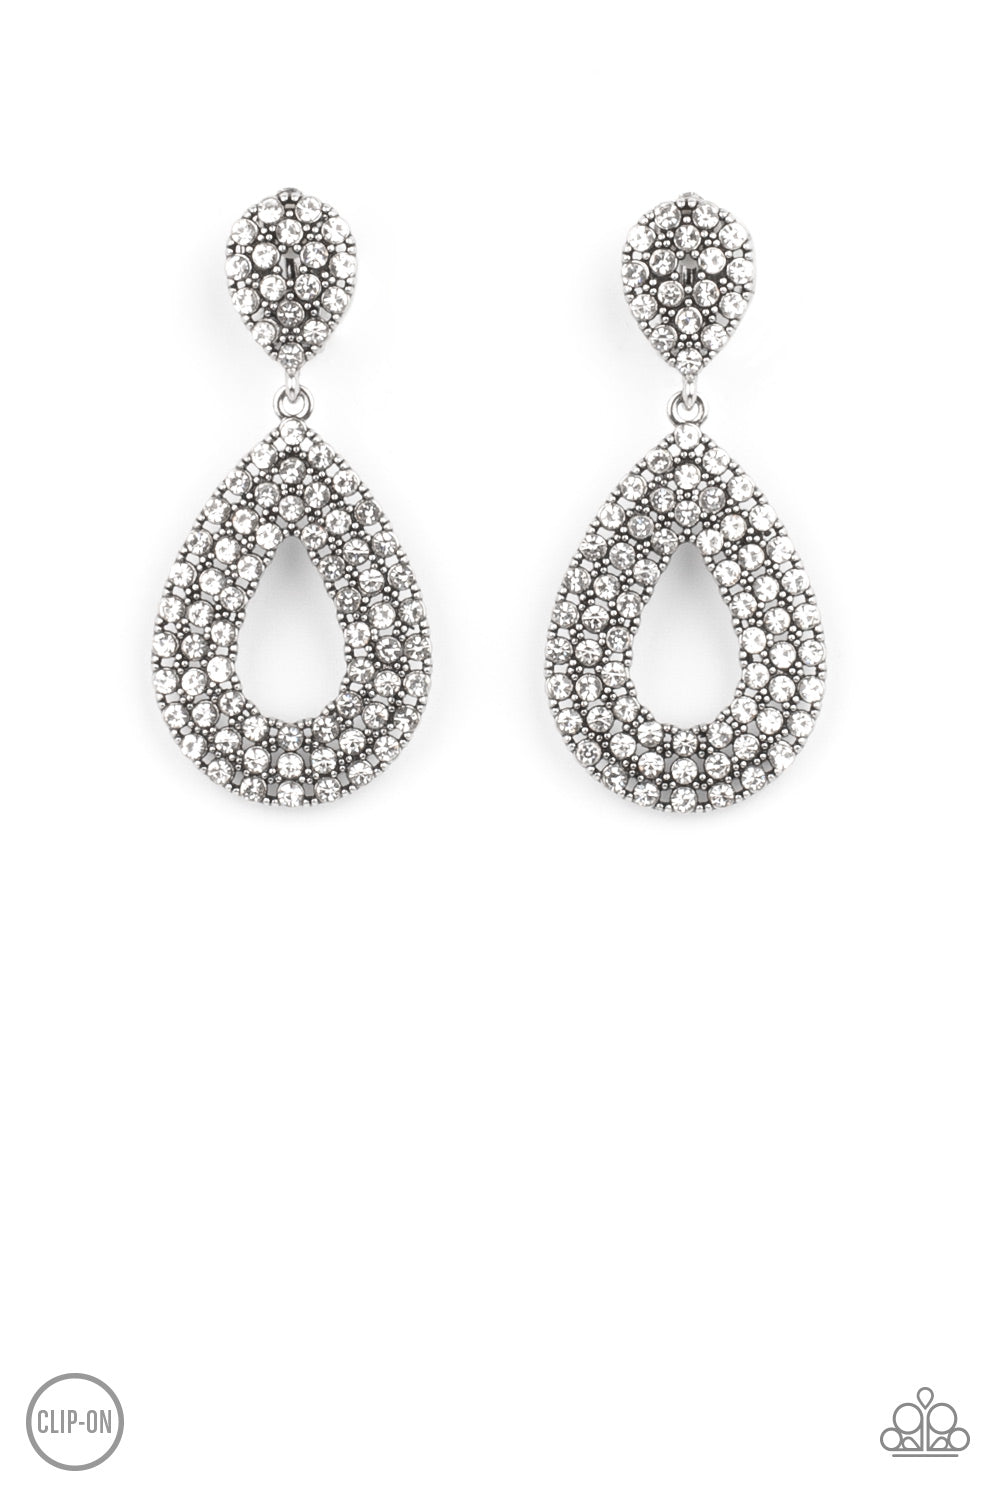 Pack In The Pizzazz White Clip-On Earring - Paparazzi Accessories  A white rhinestone encrusted silhouette teardrop attaches to the bottom of a dainty white rhinestone encrusted teardrop, creating a glamorous lure. Earring attaches to a standard clip-on fitting.  Sold as one pair of clip-on earrings.